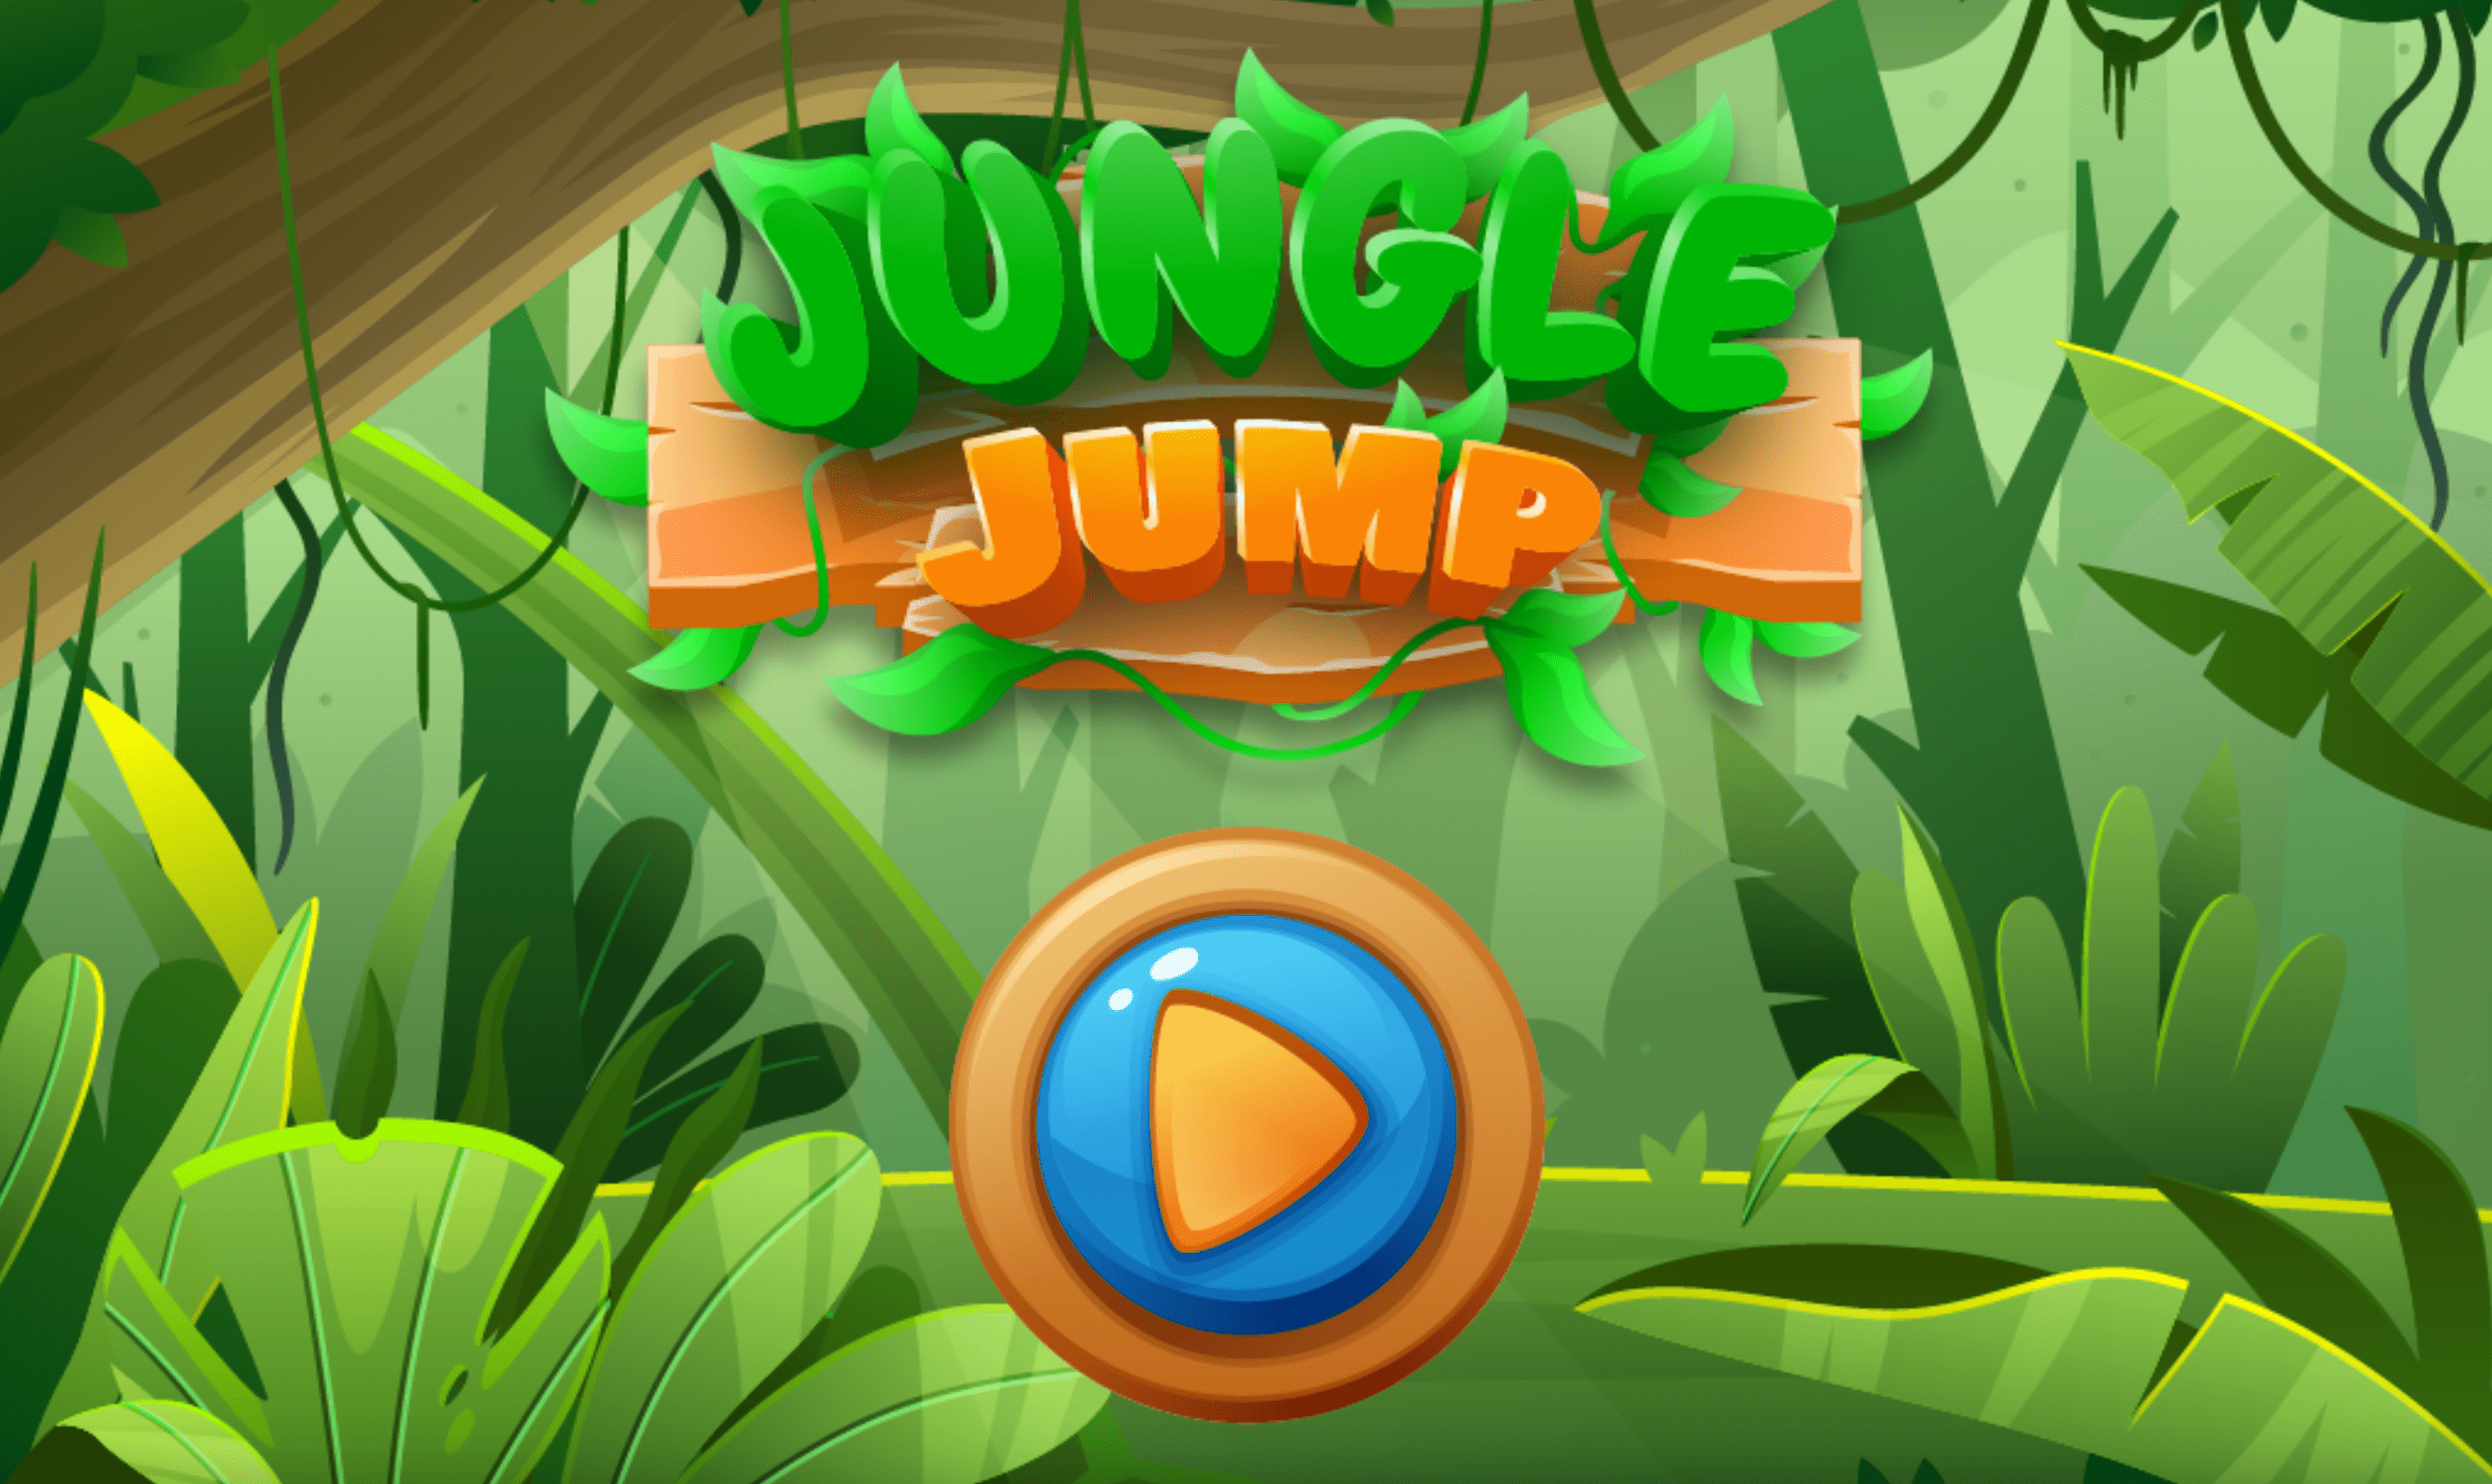 Game title screen featuring a jungle background and a play buton.